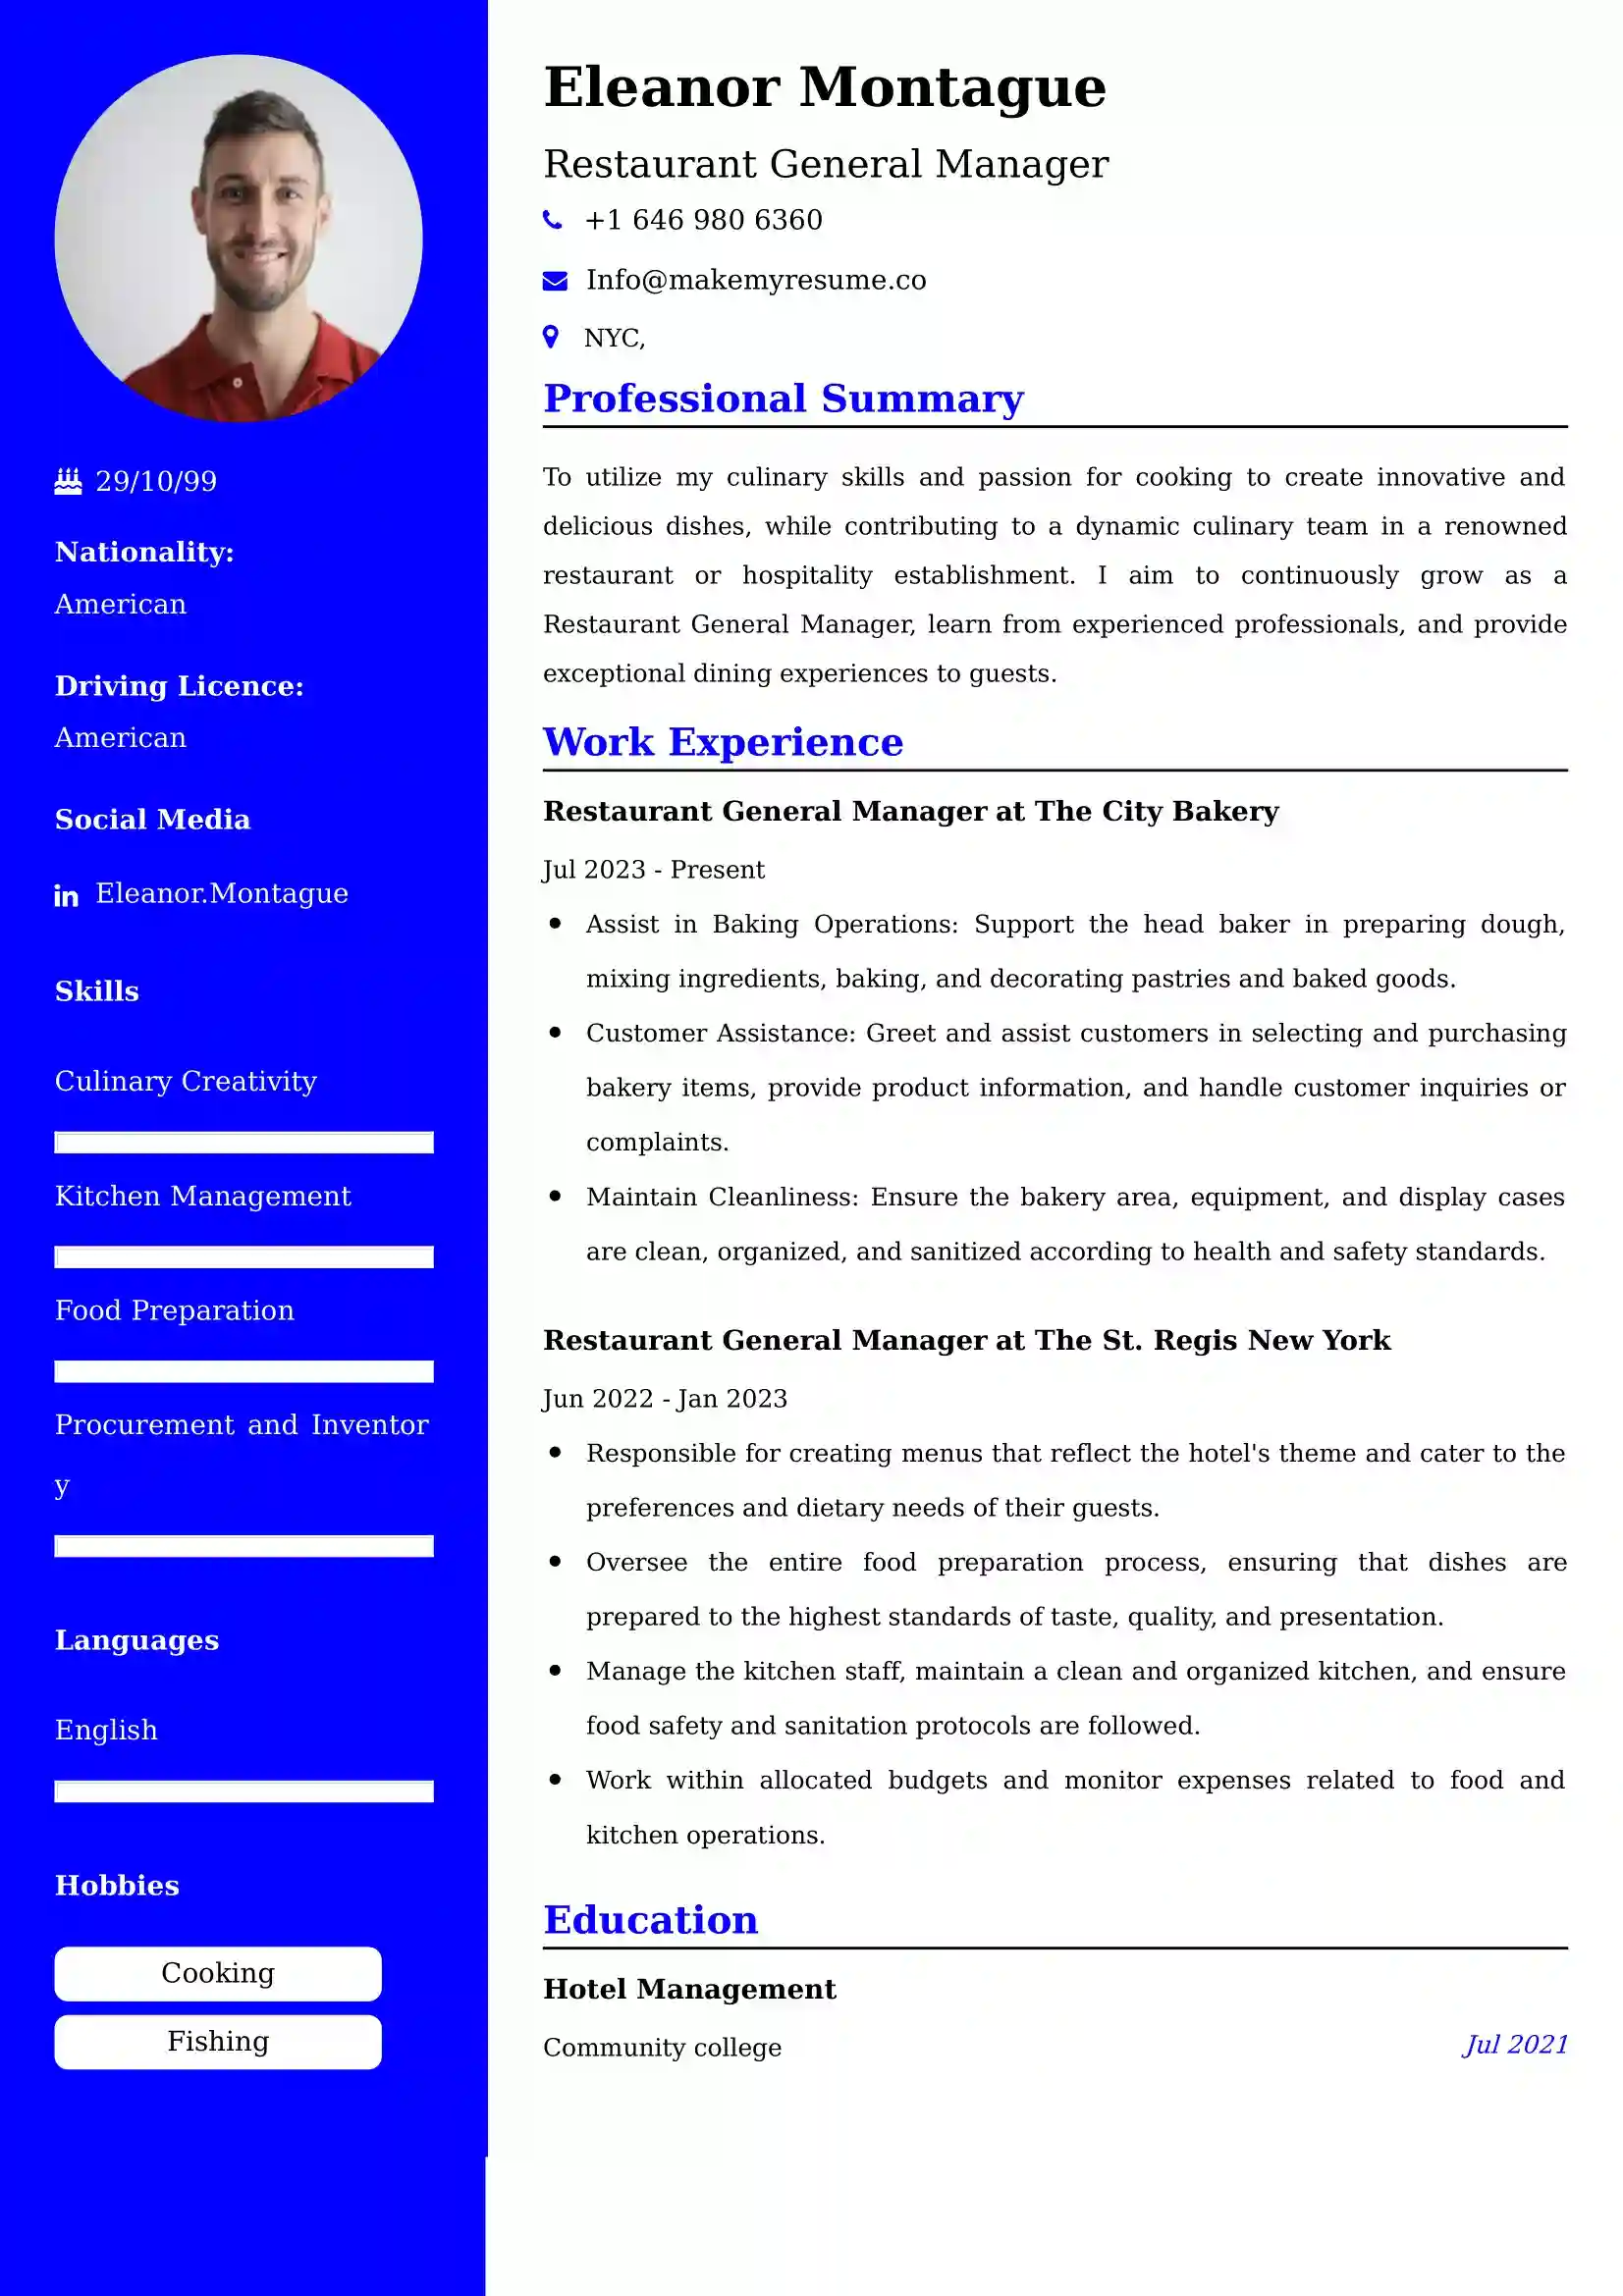 Restaurant General Manager Resume Examples - UK Format, Latest Template.